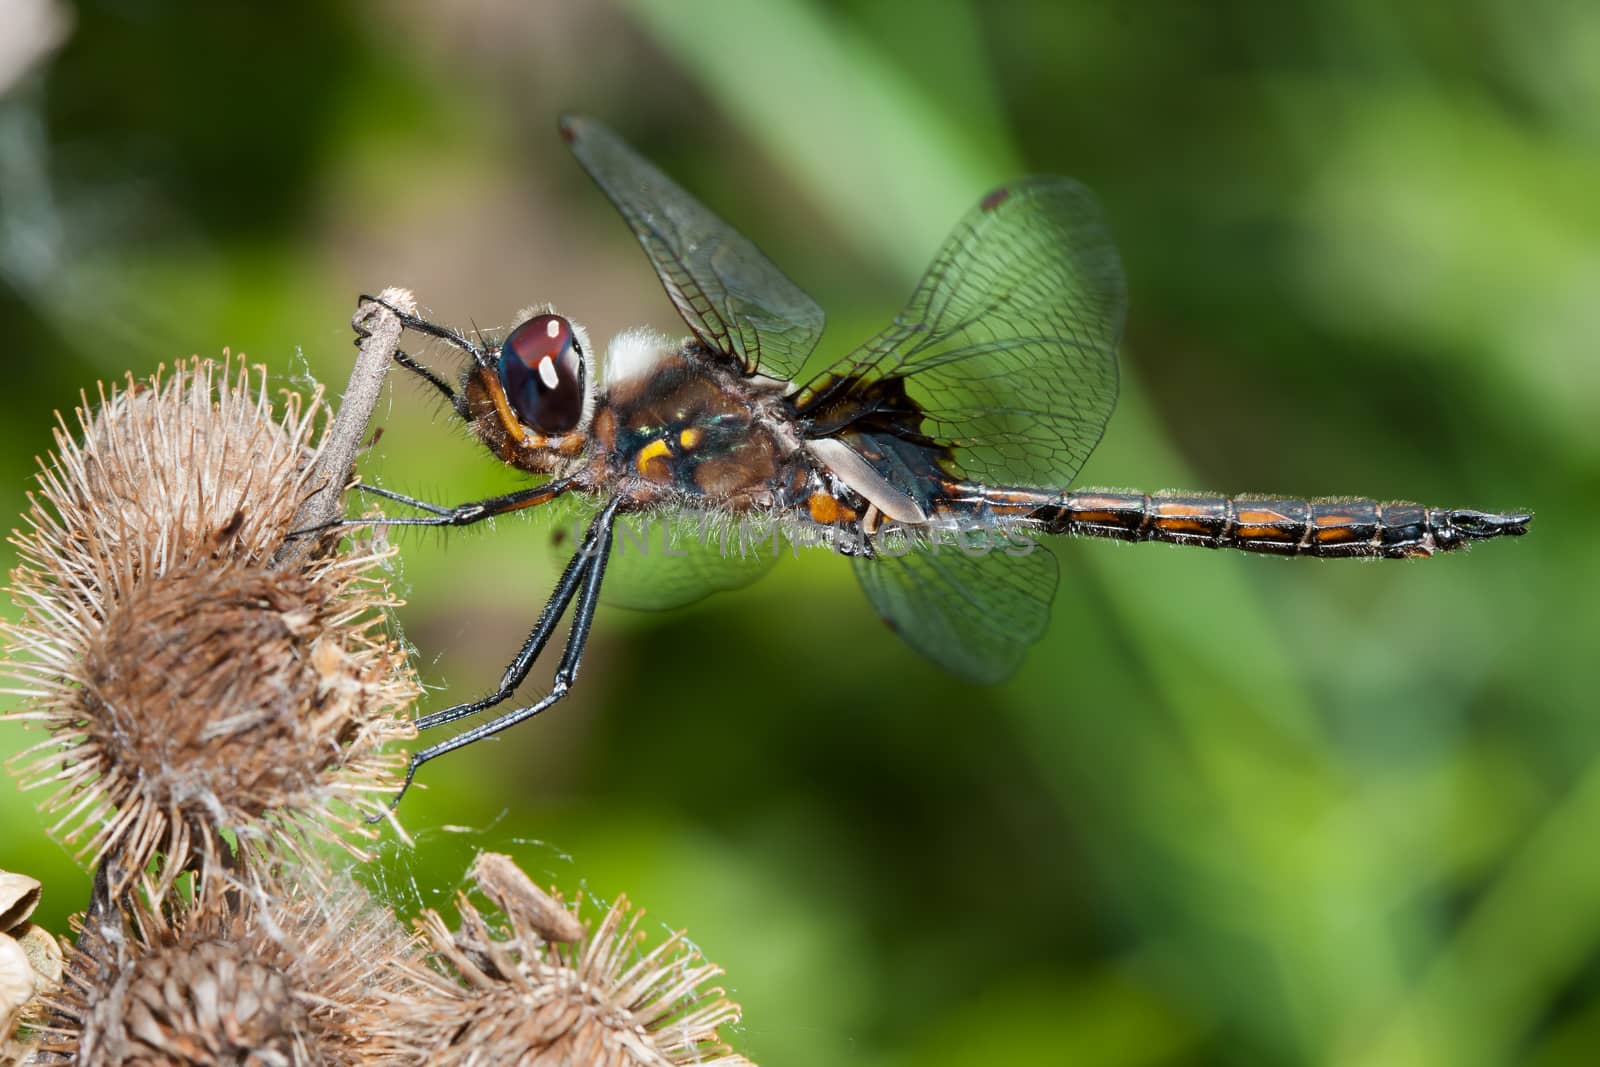 Twelve Spotted Skimmer Dragonfly by Coffee999